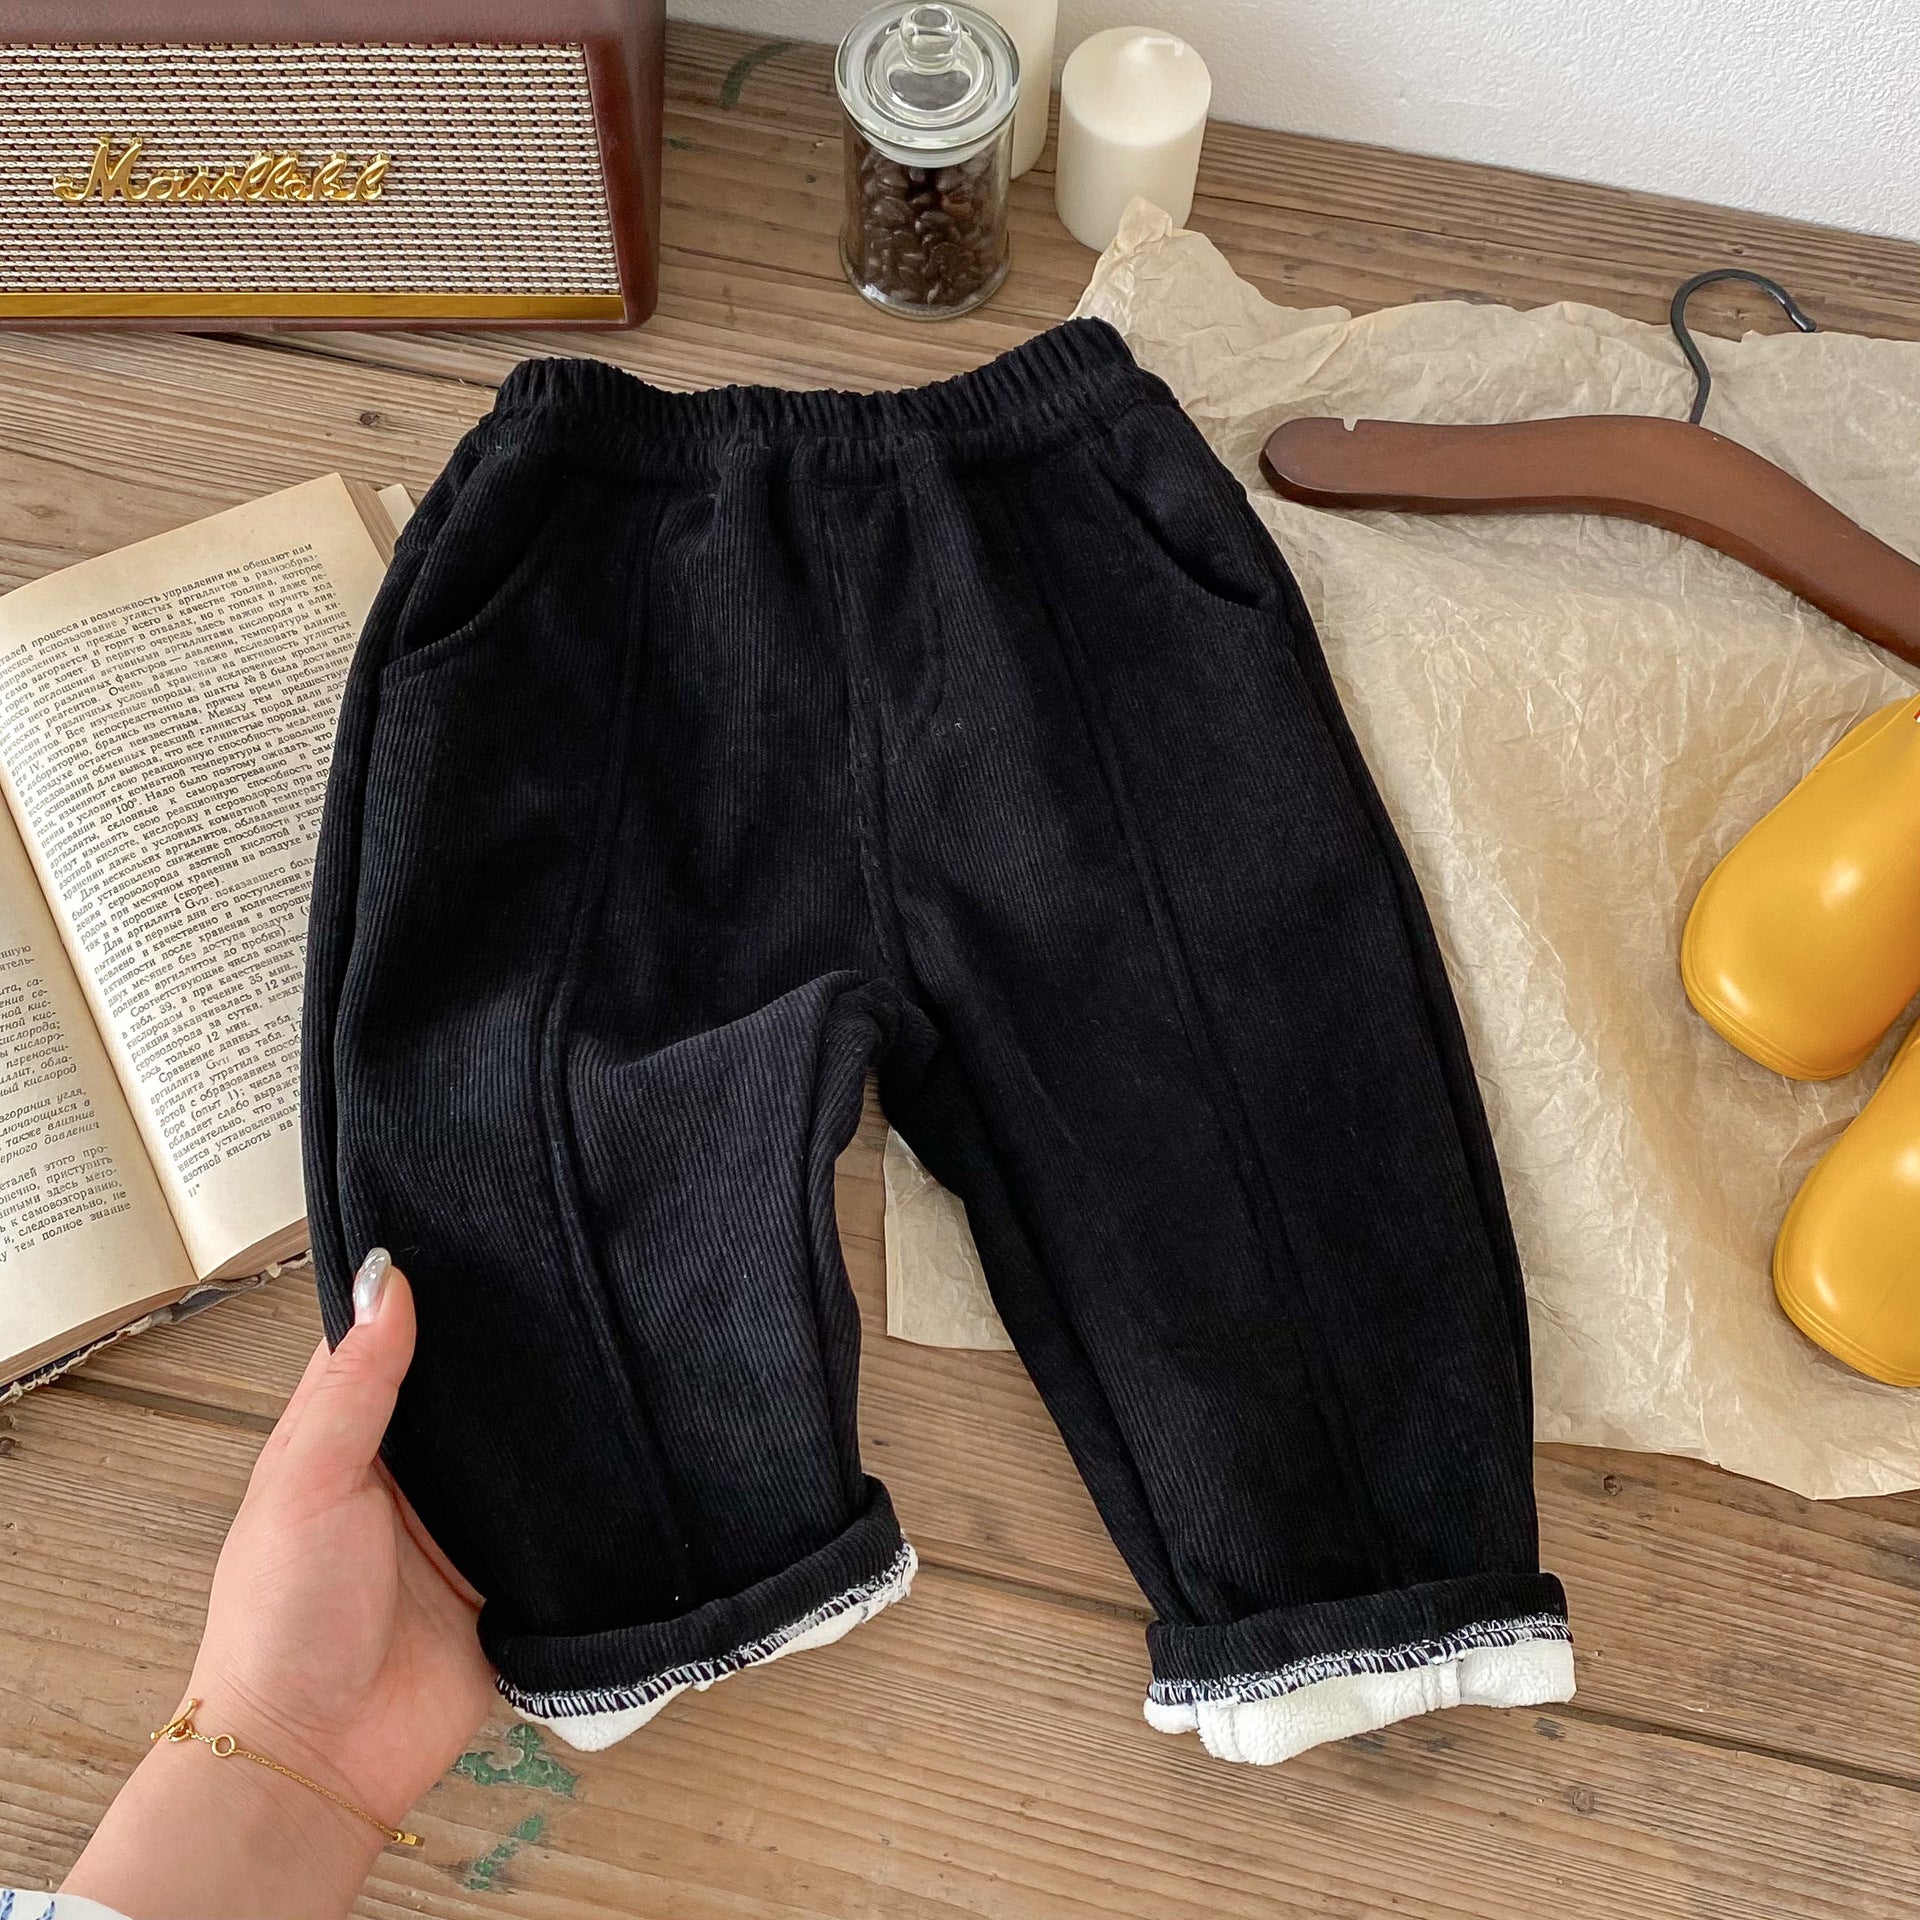 NEW Corduroy Women's Pants lined with soft fleece lining. Thick to survive  the winter weather. Highly stretchable, very comfy & soft